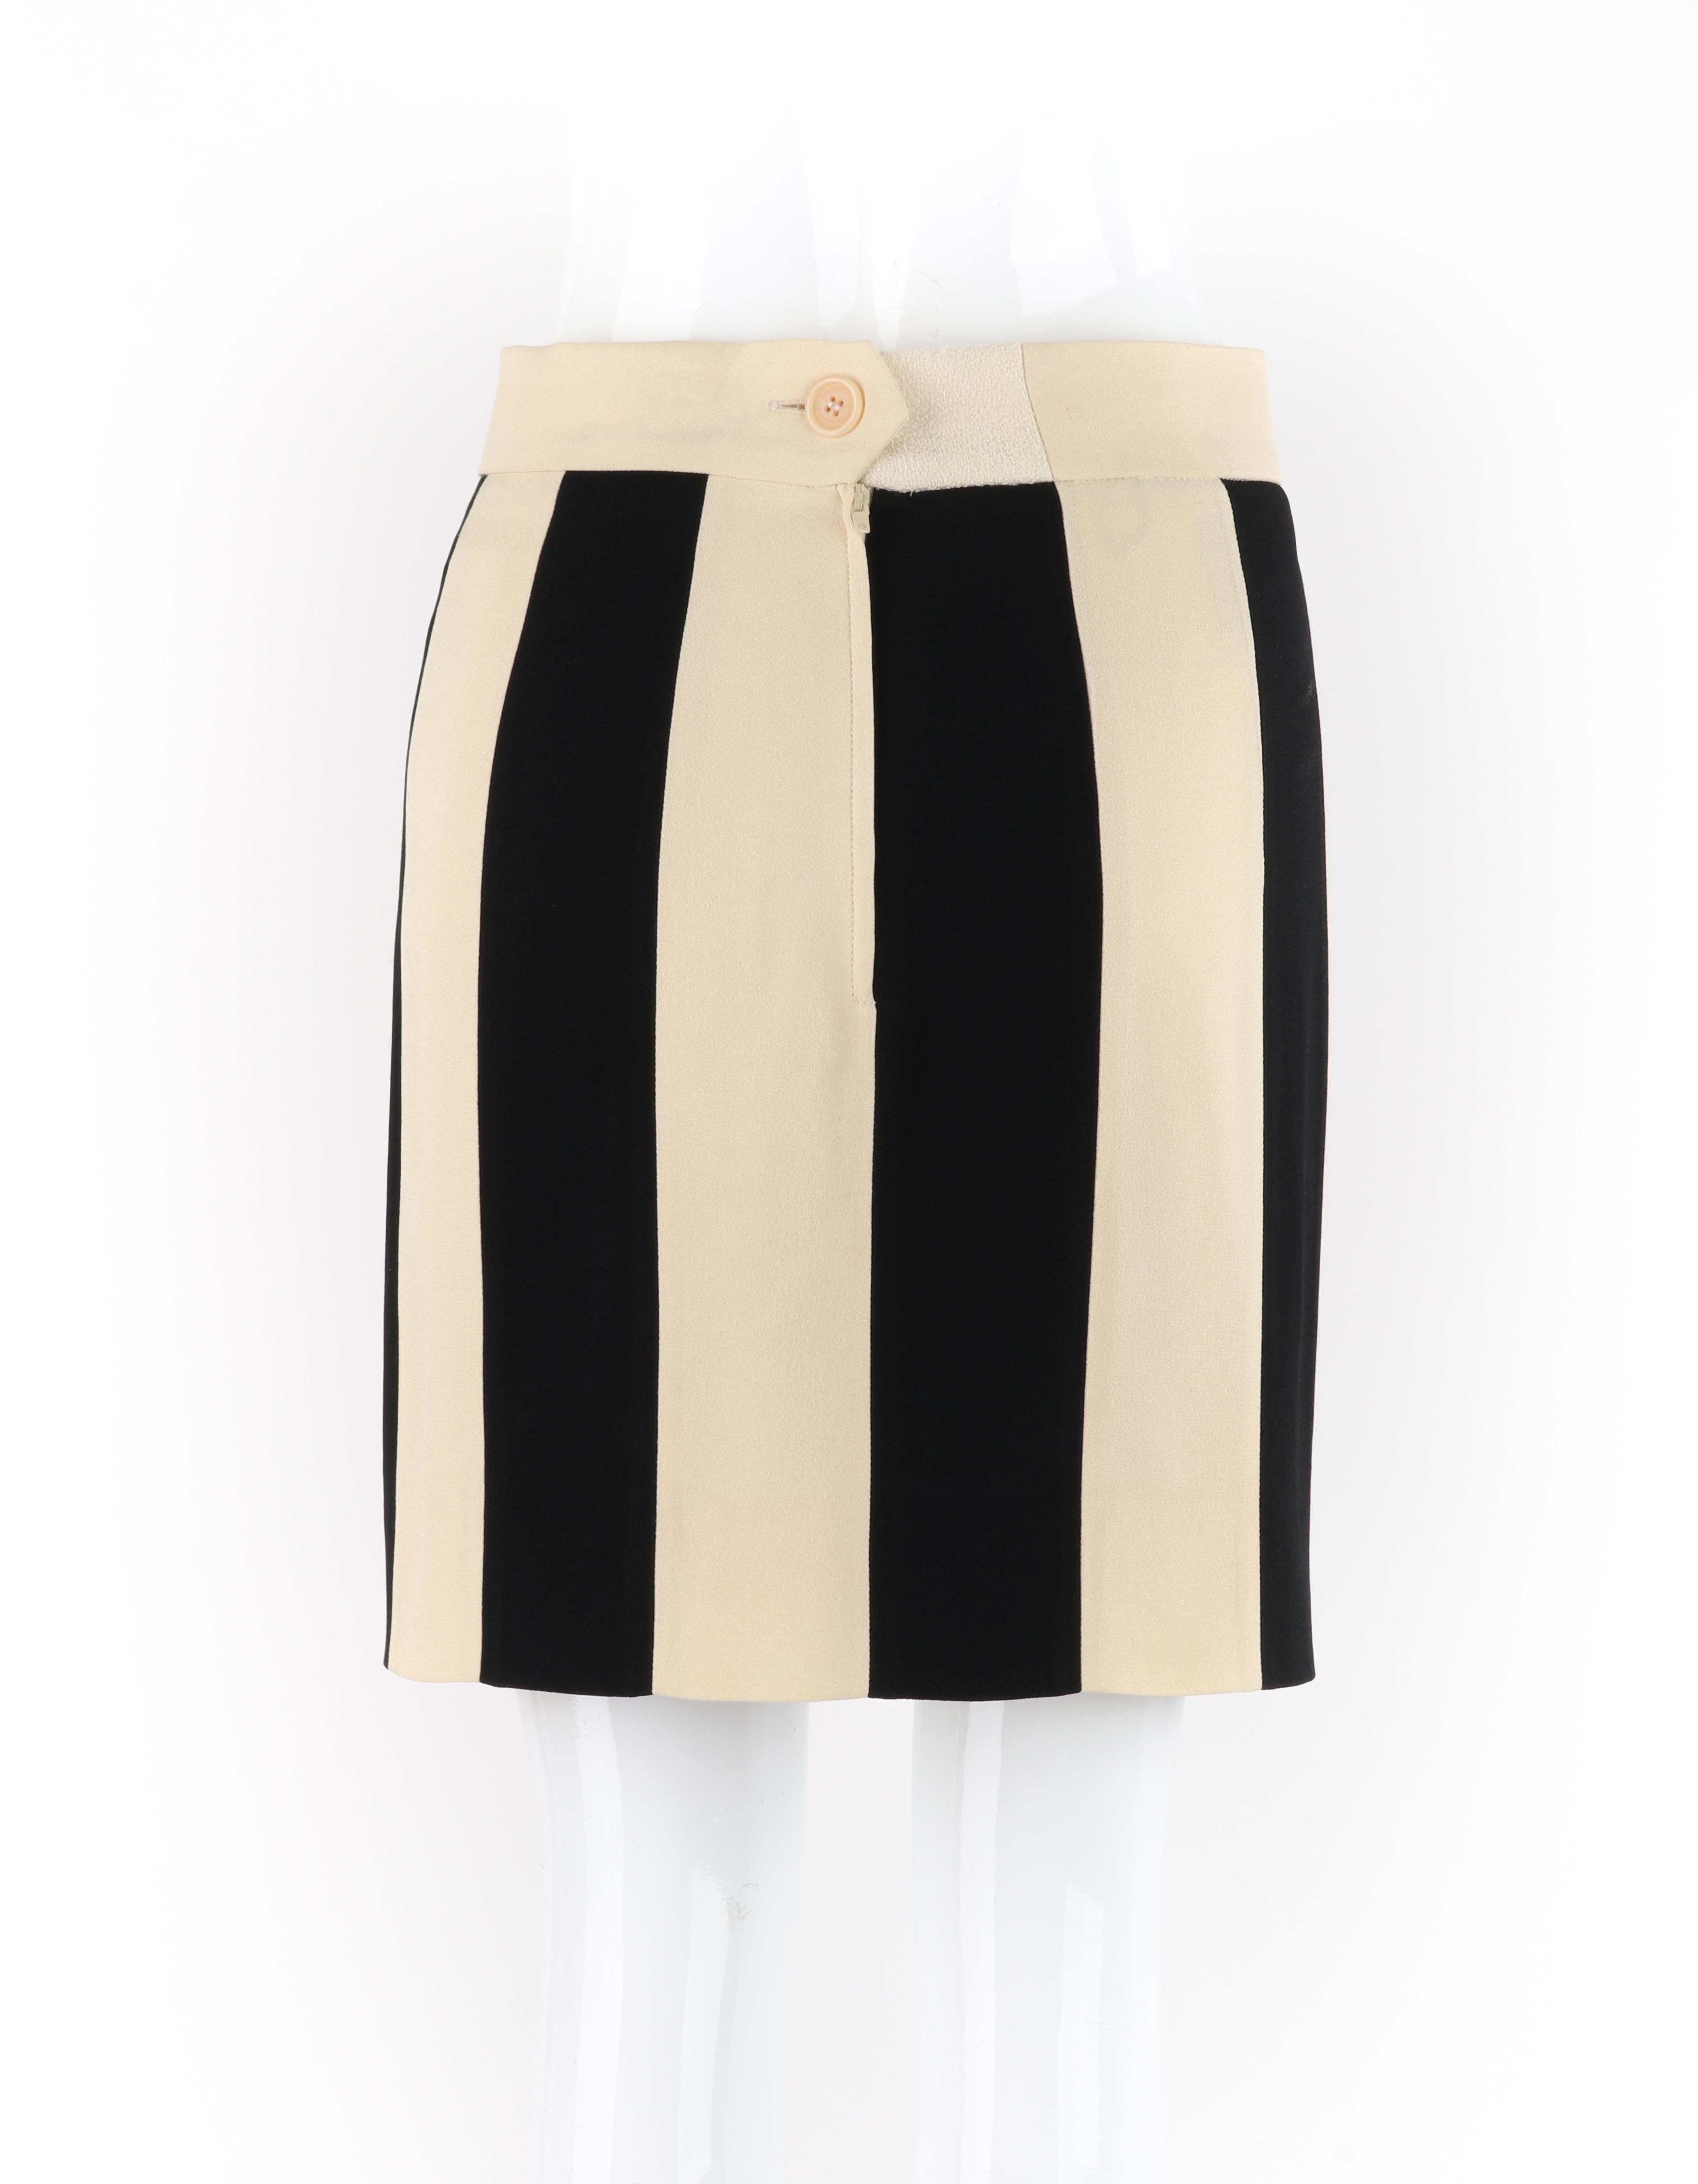 MOSCHINO S/S 2006 Cheap & Chic Ivory Black Vertical Panel Striped A-Line Skirt In Good Condition For Sale In Thiensville, WI